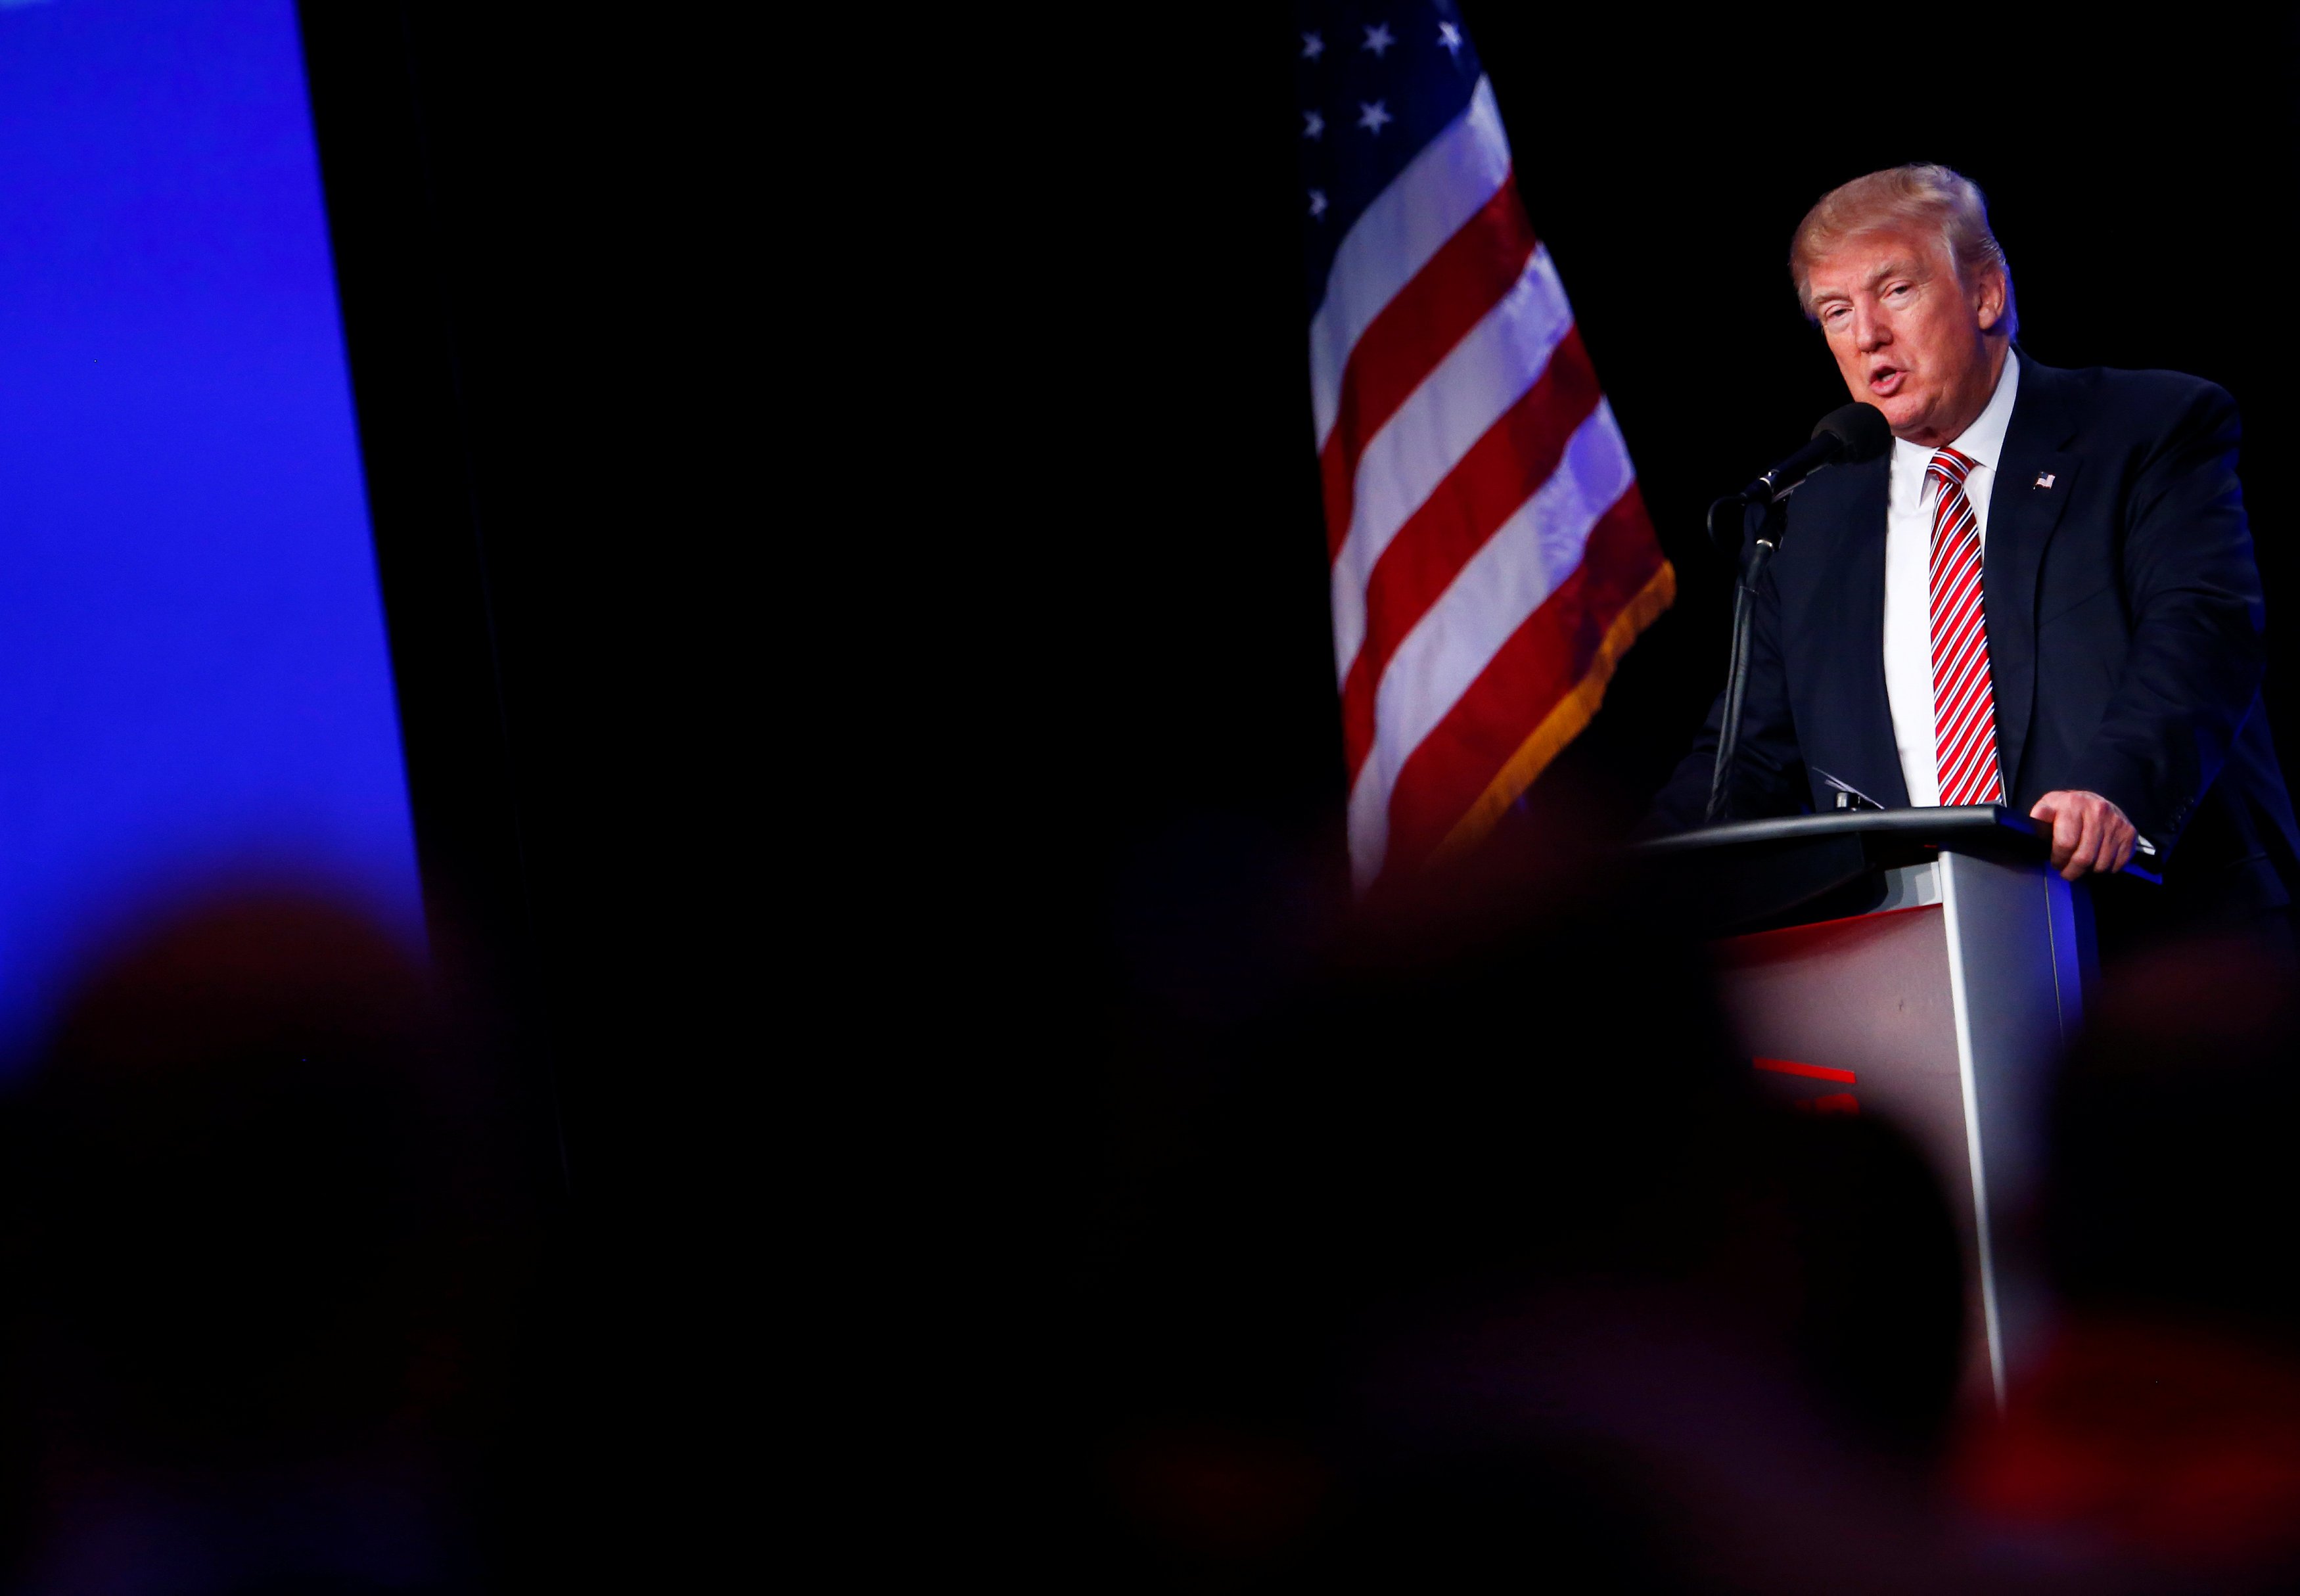 Republican U.S. presidential nominee Trump speaks at the National Association of Home Builders event at the Fontainebleau Miami Beach in Miami, Florida